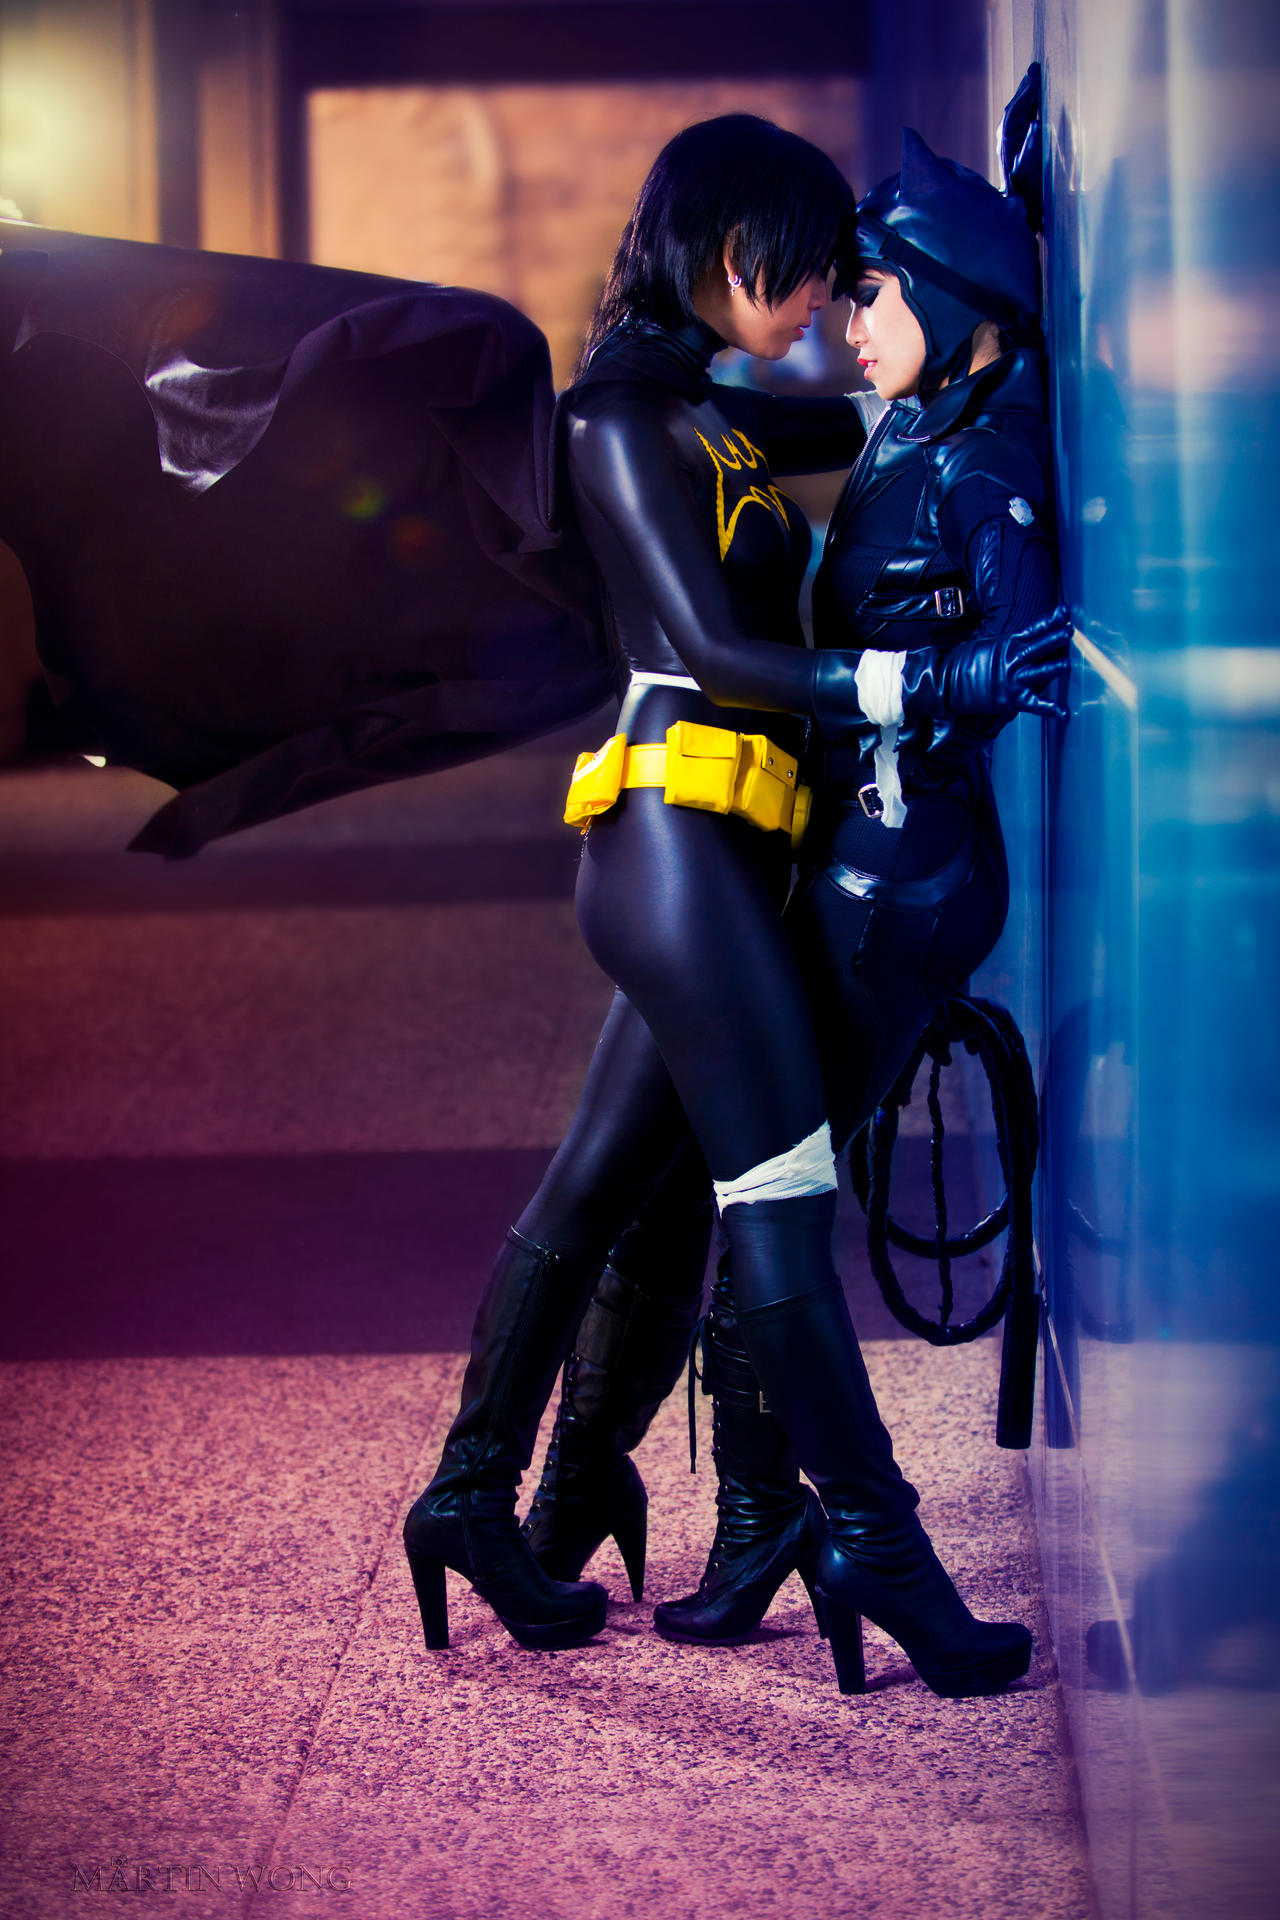 Batgirl x Catwoman by henflay on DeviantArt